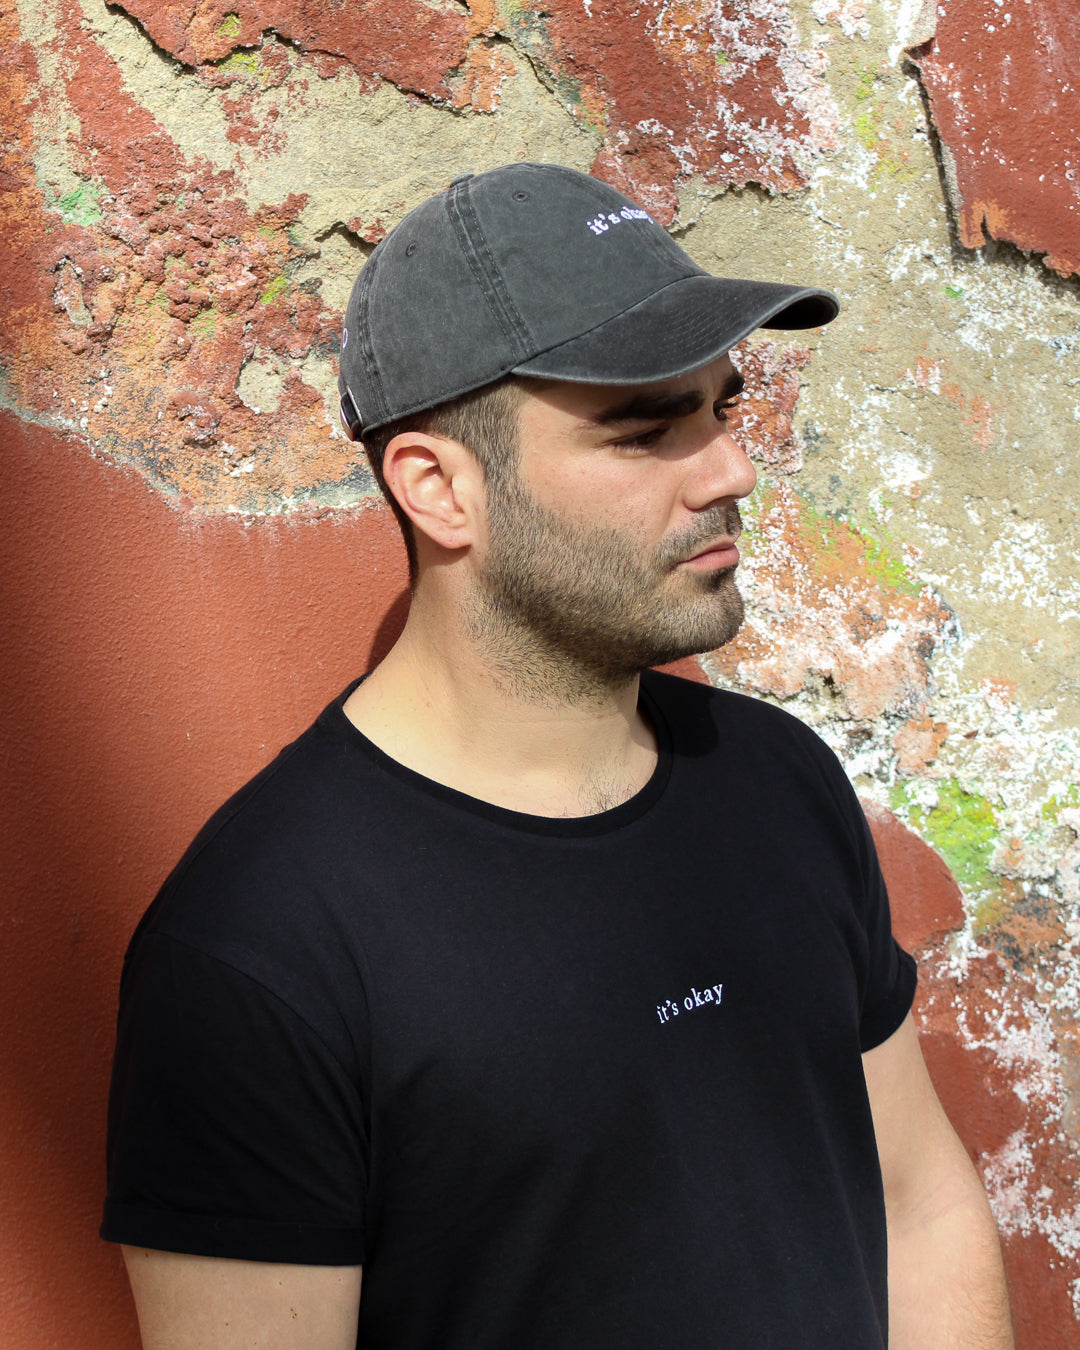 Blackberry cap, 100% cotton, embroidered. it's okay to be exactly who you are. From Portugal with love. (Image: blackberry cap on a guy wearing essential black t-shirt)